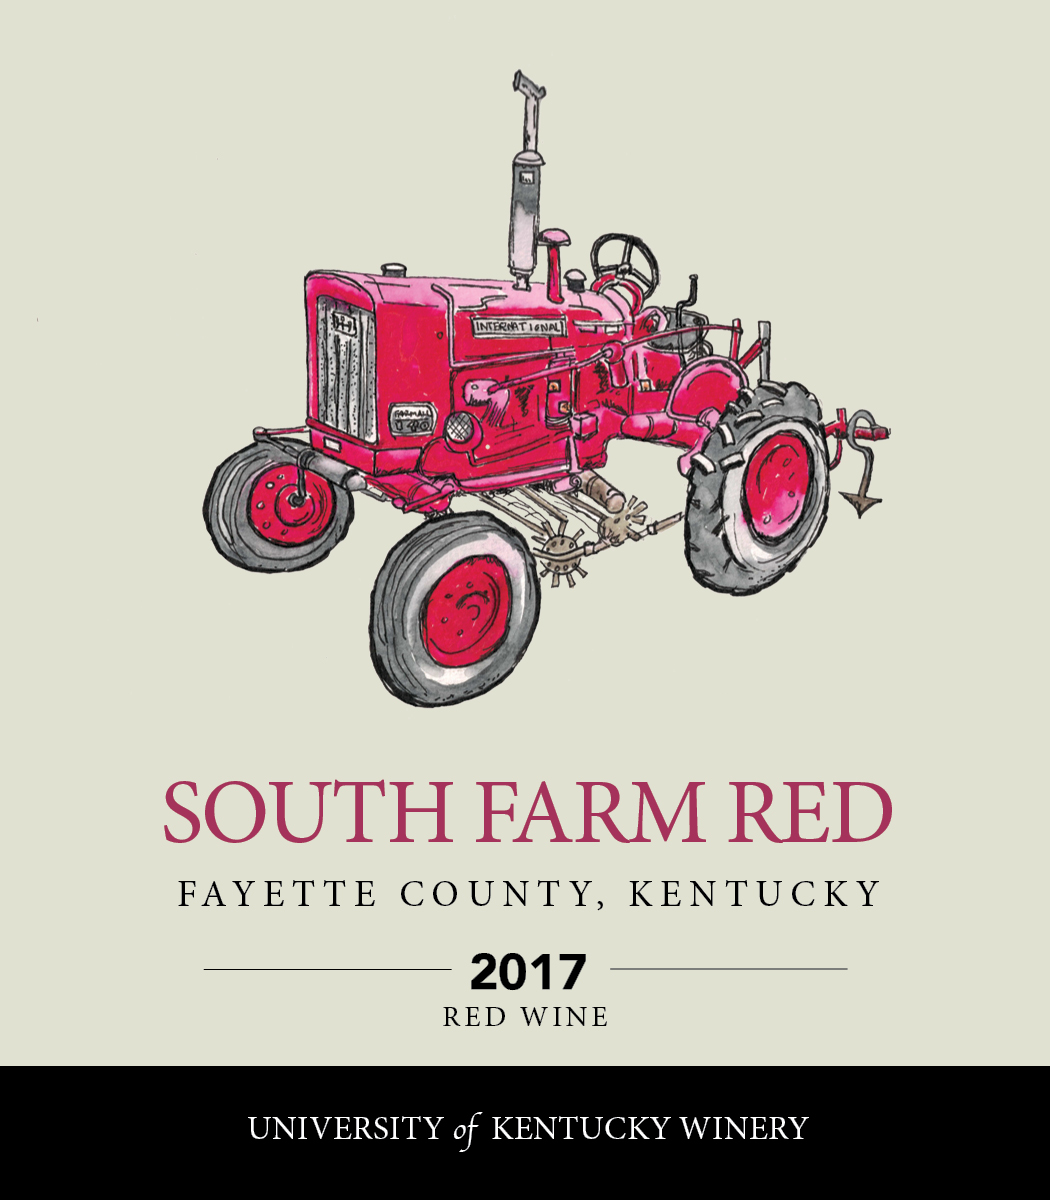 South Farm Red 2017 Red wine